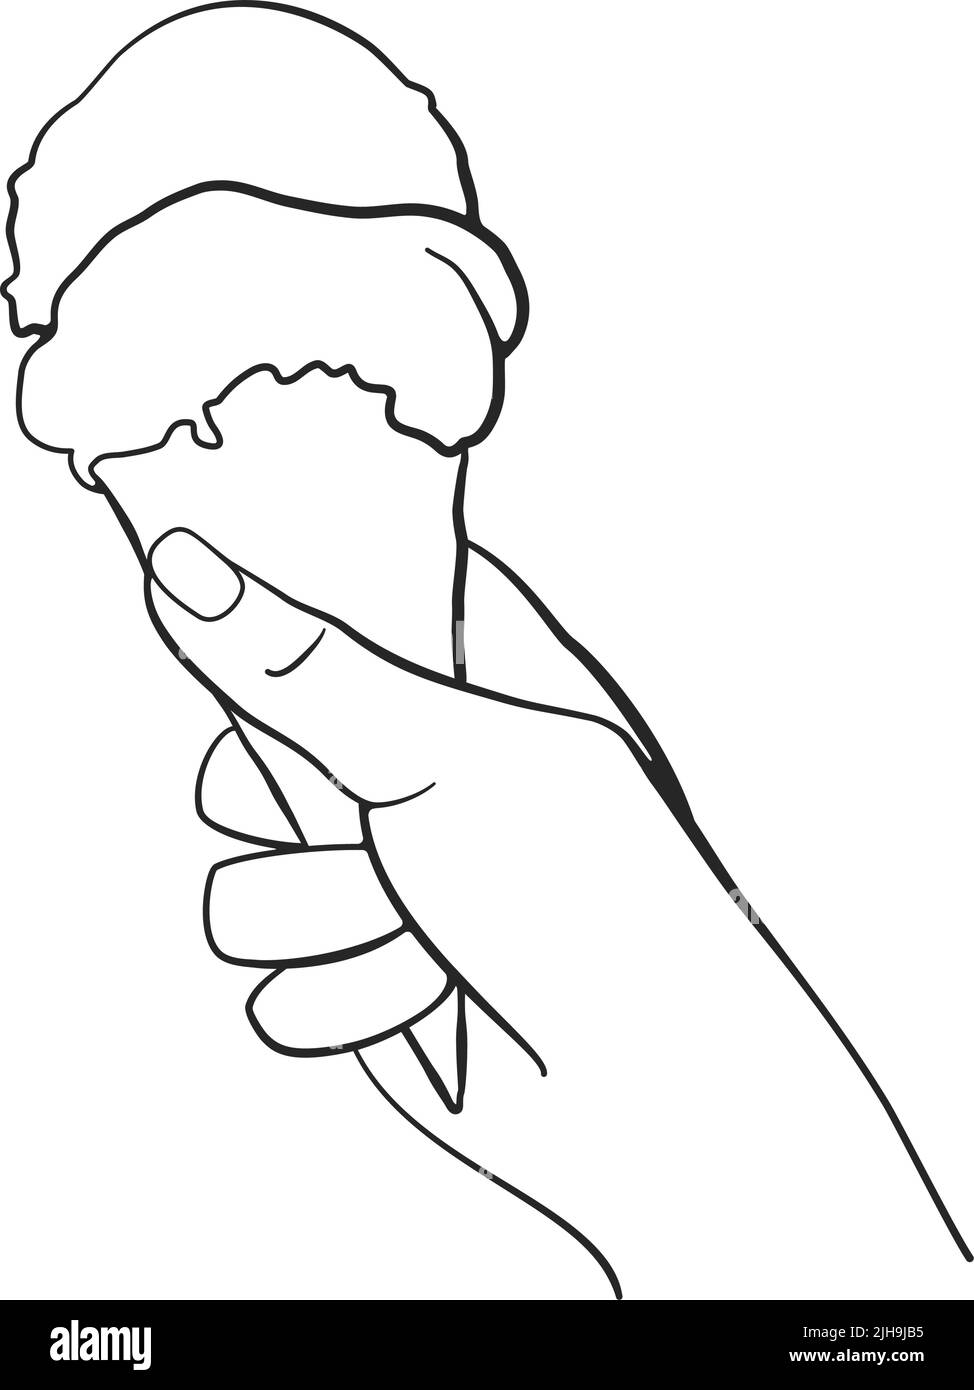 Gelati icecream cone held up to the summer sky as a line illustration vector Stock Vector